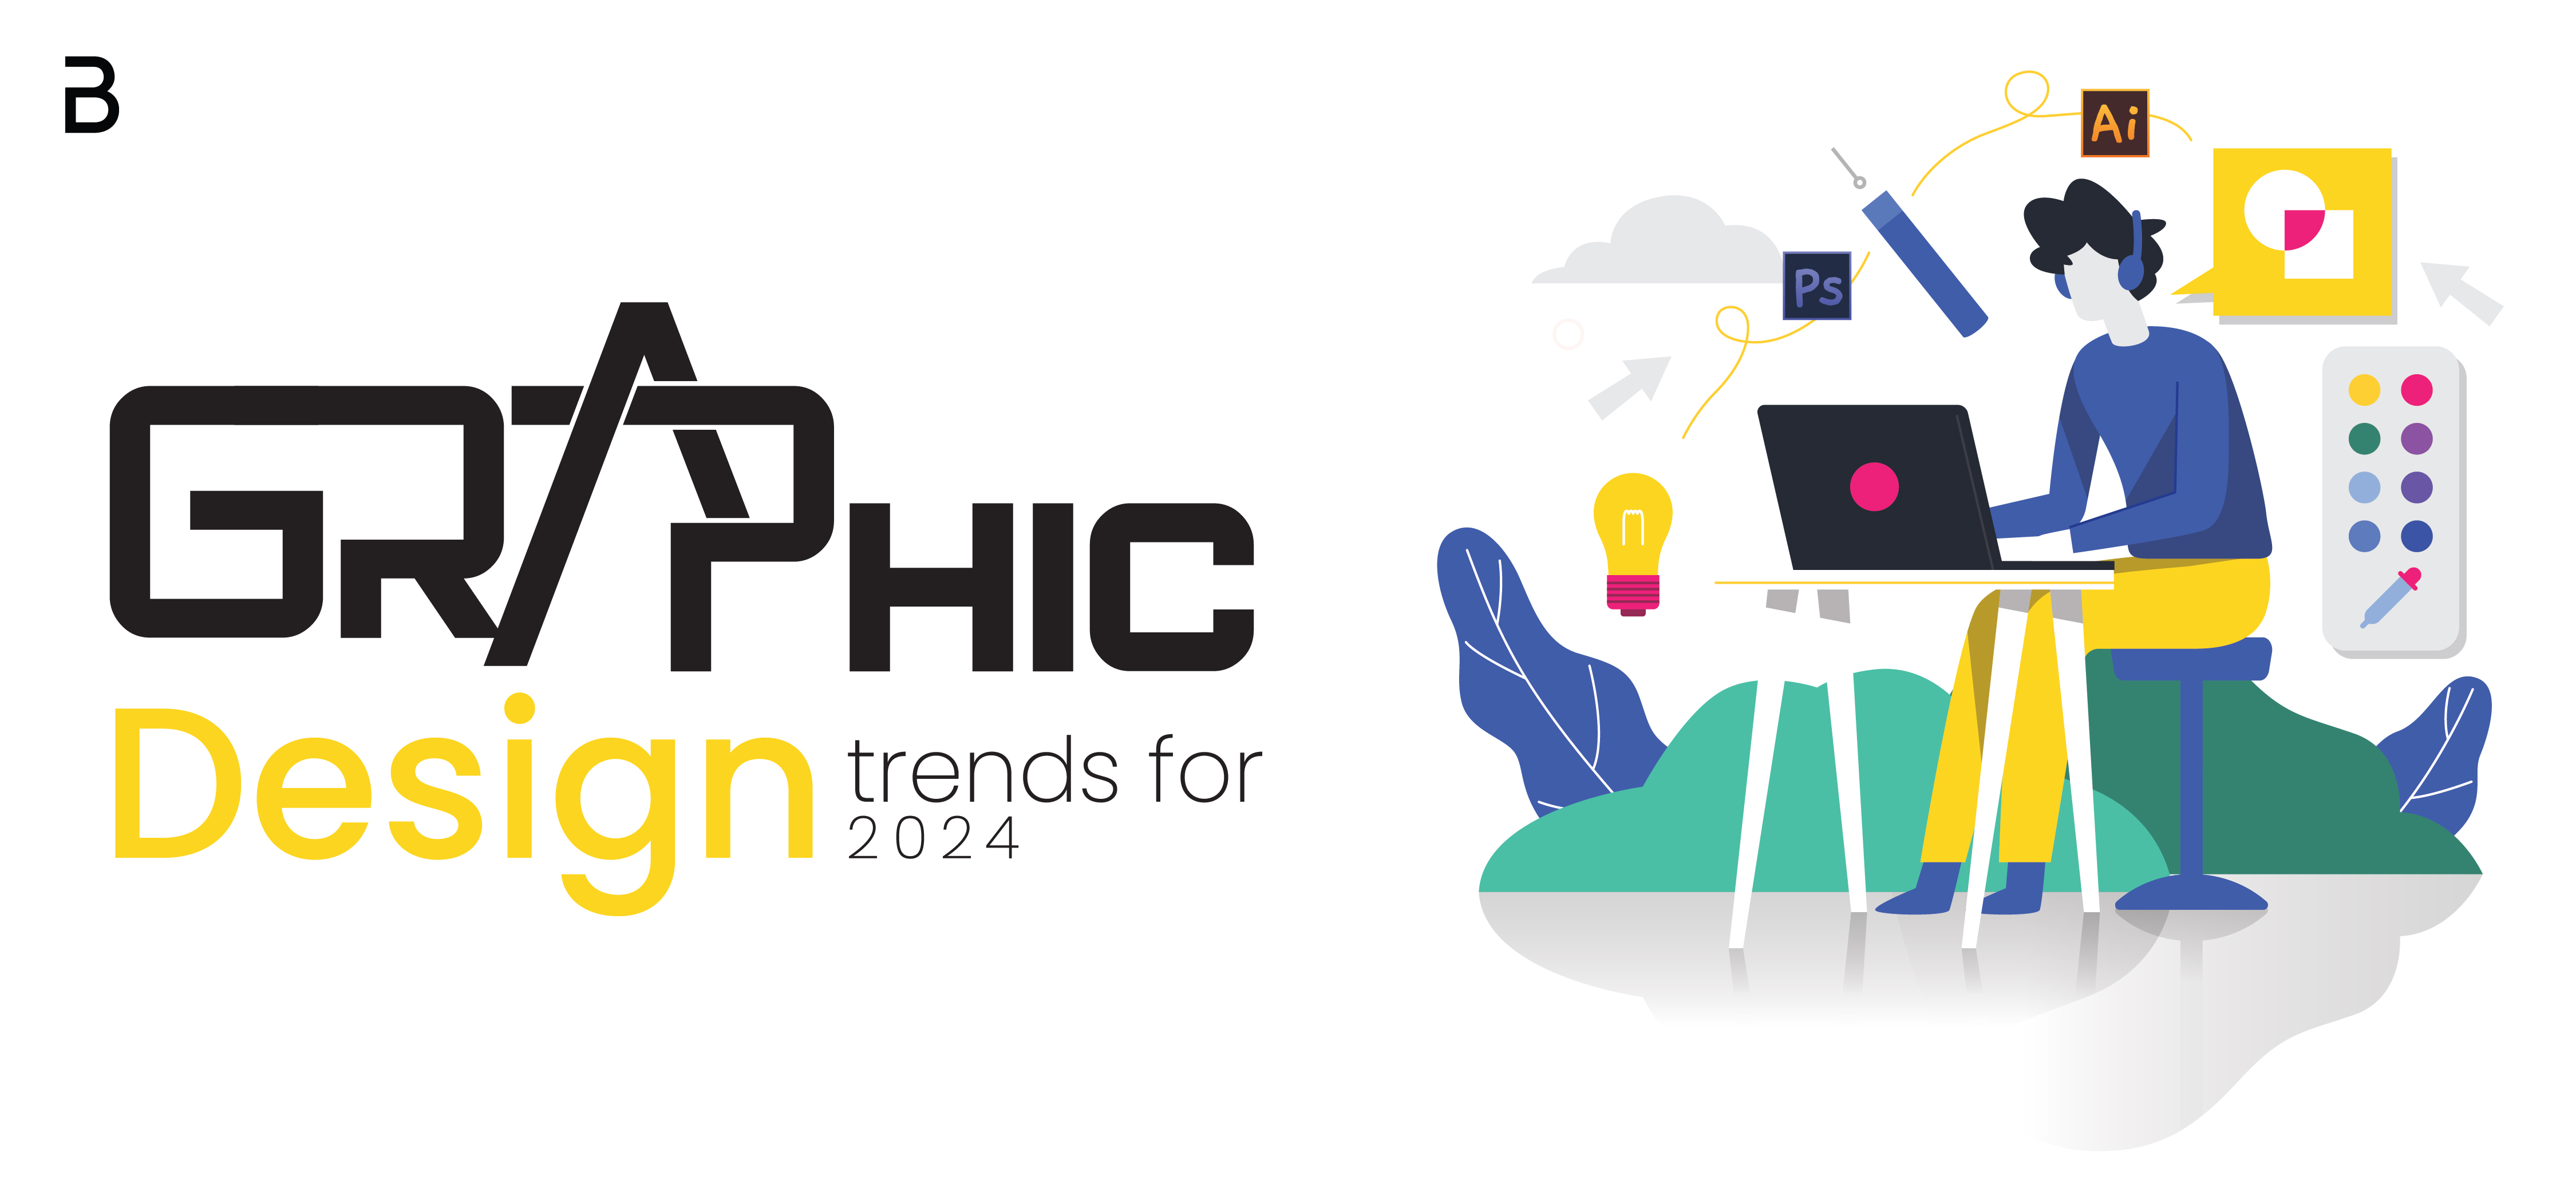 Graphic design trends for 2024.